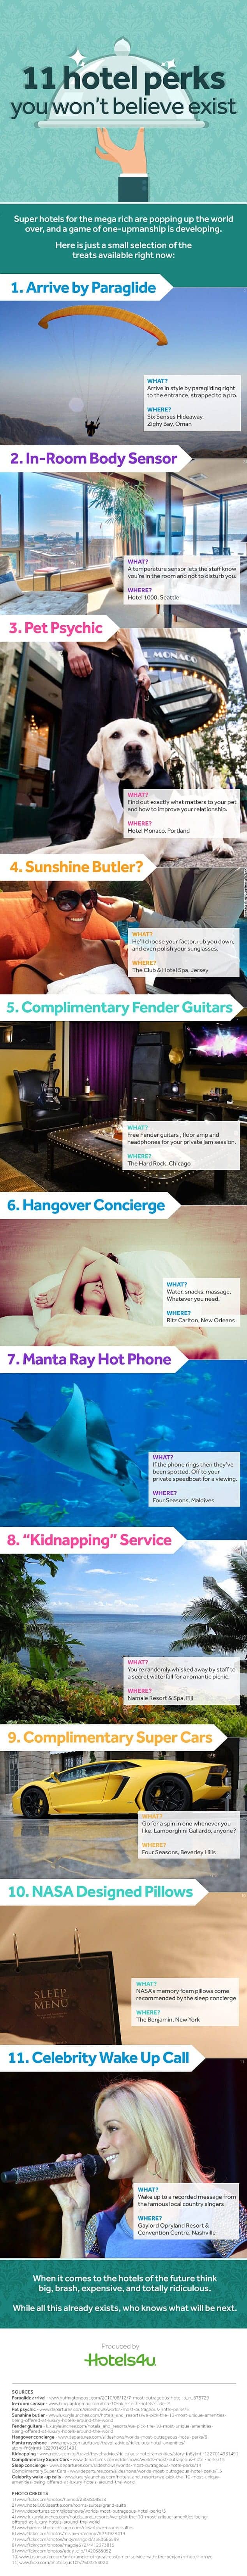 11 Hotel Perks You Won't Believe Exist